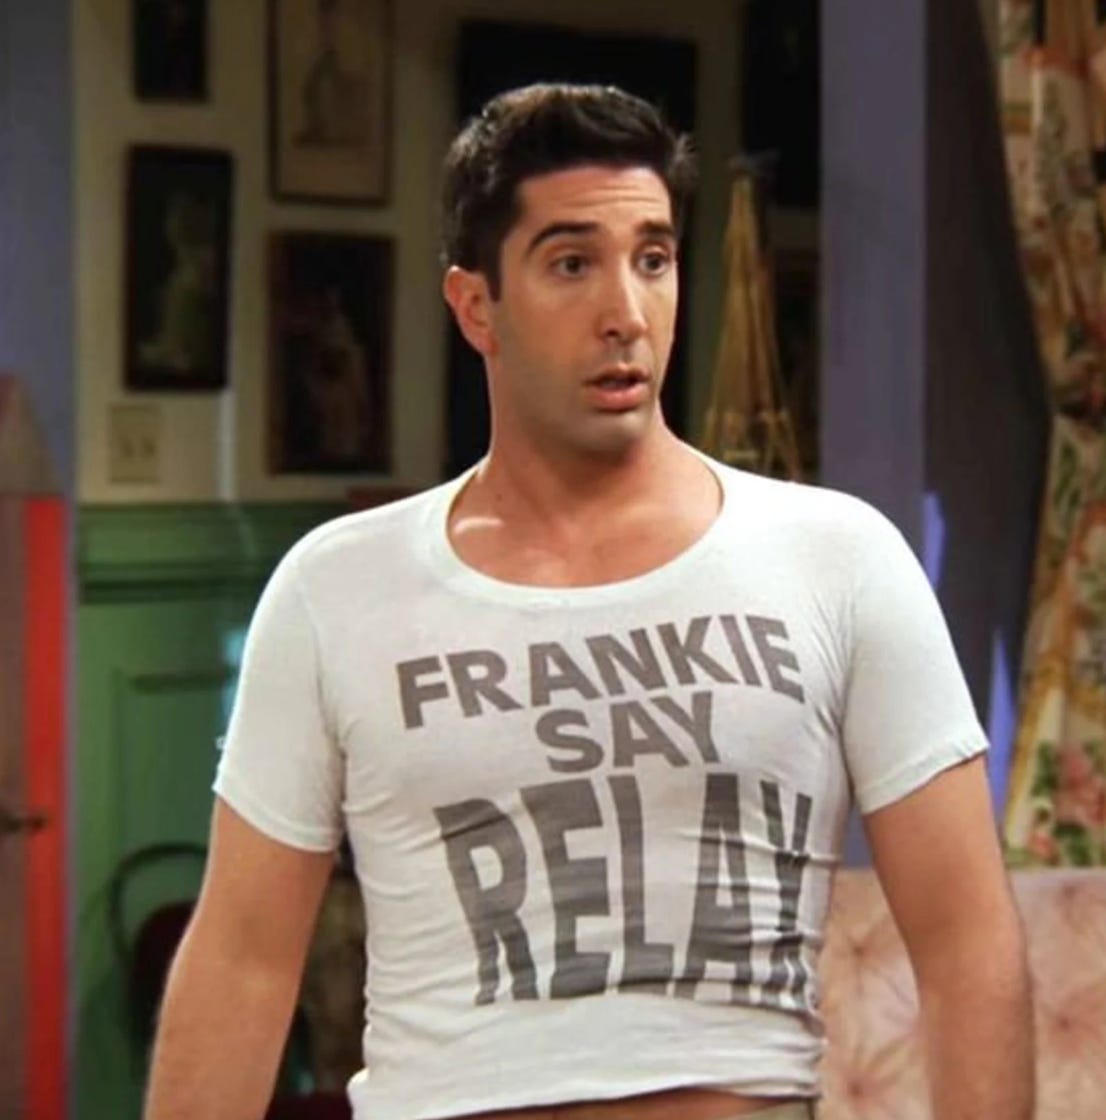 David Schwimmer as Ross in Friends wearing a "Frankie Say Relax" t-shirt